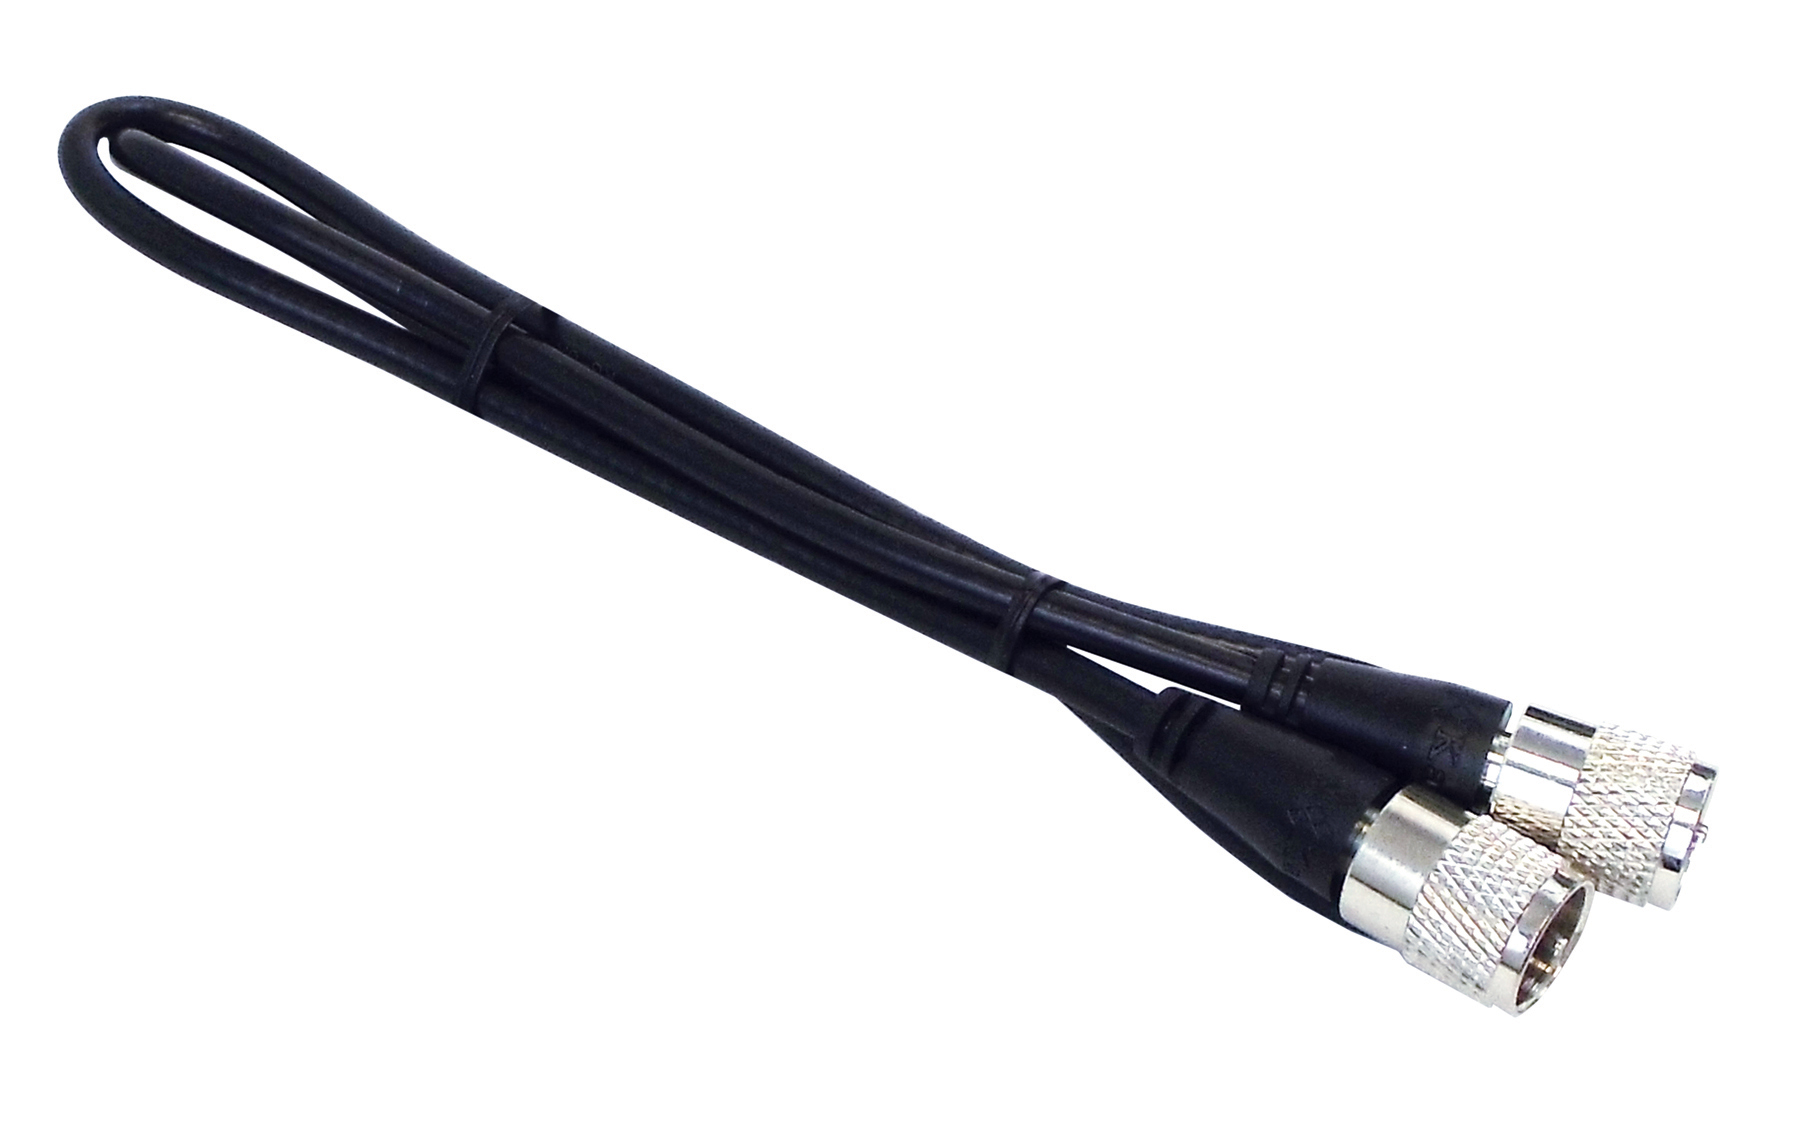 Kalibur 3 Foot Black Rg8X Coax Cable Assembly With Molded Pl259 Connectors On Each End